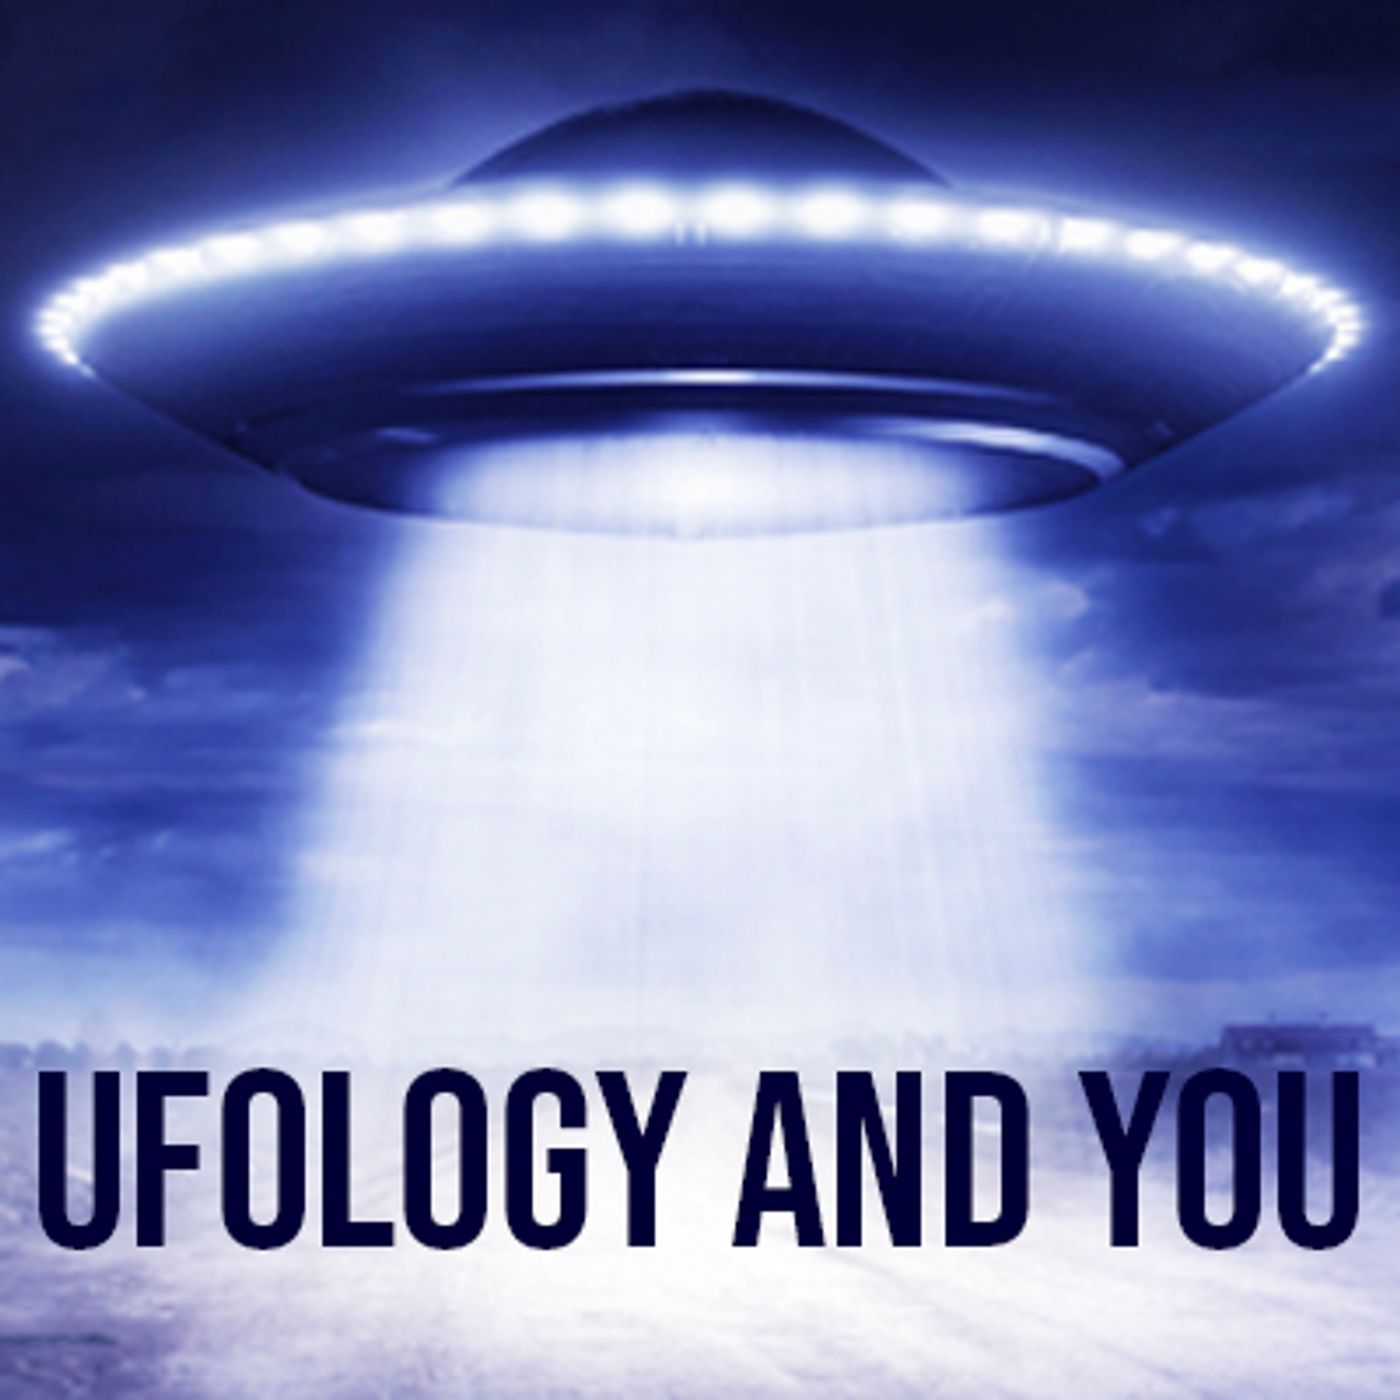 Want To Be A Ufologist?